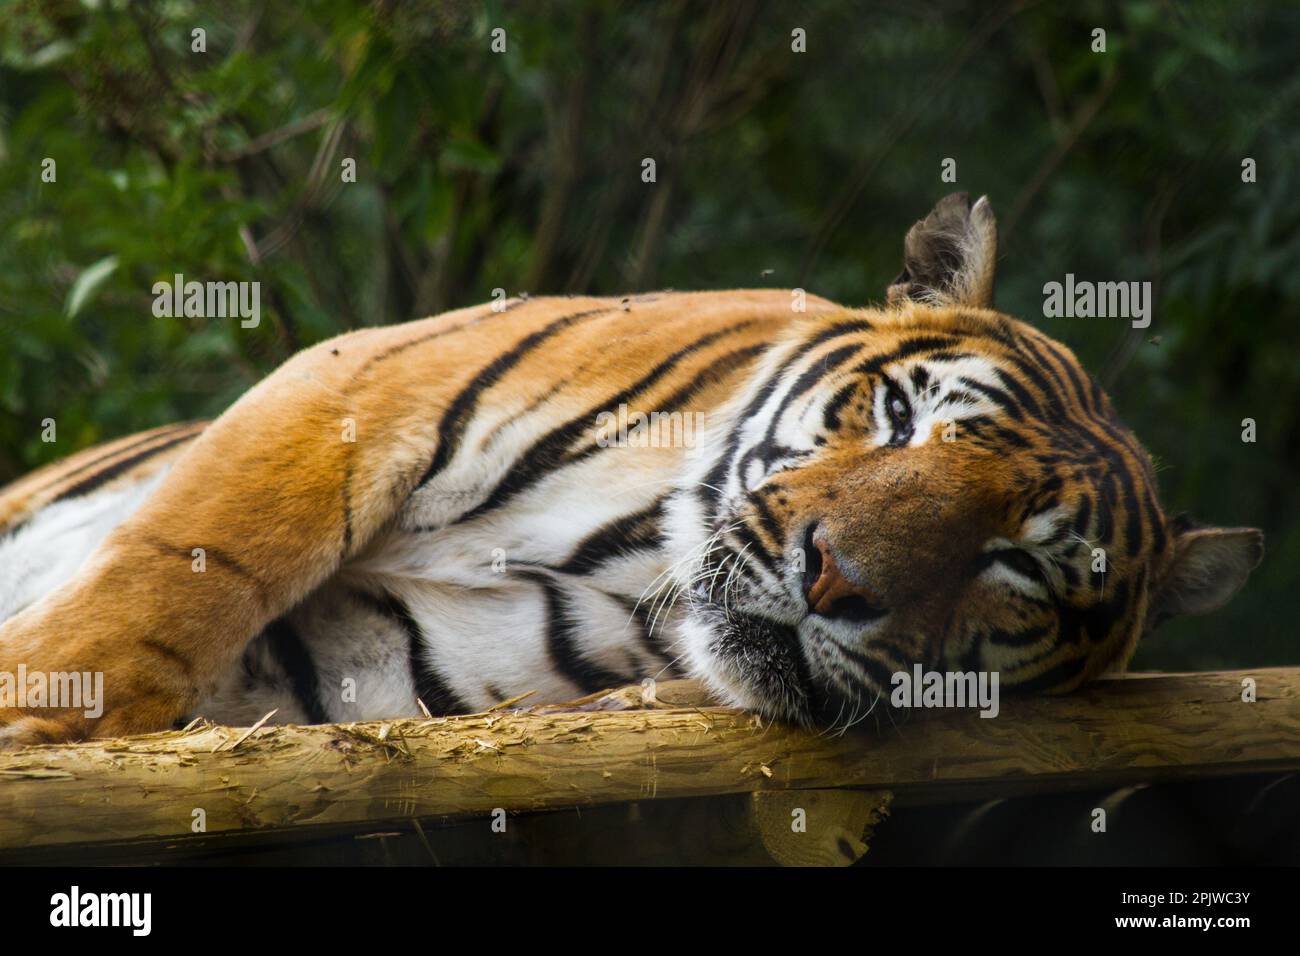 A majestic Bengal tiger resting its head on a branch Stock Photo